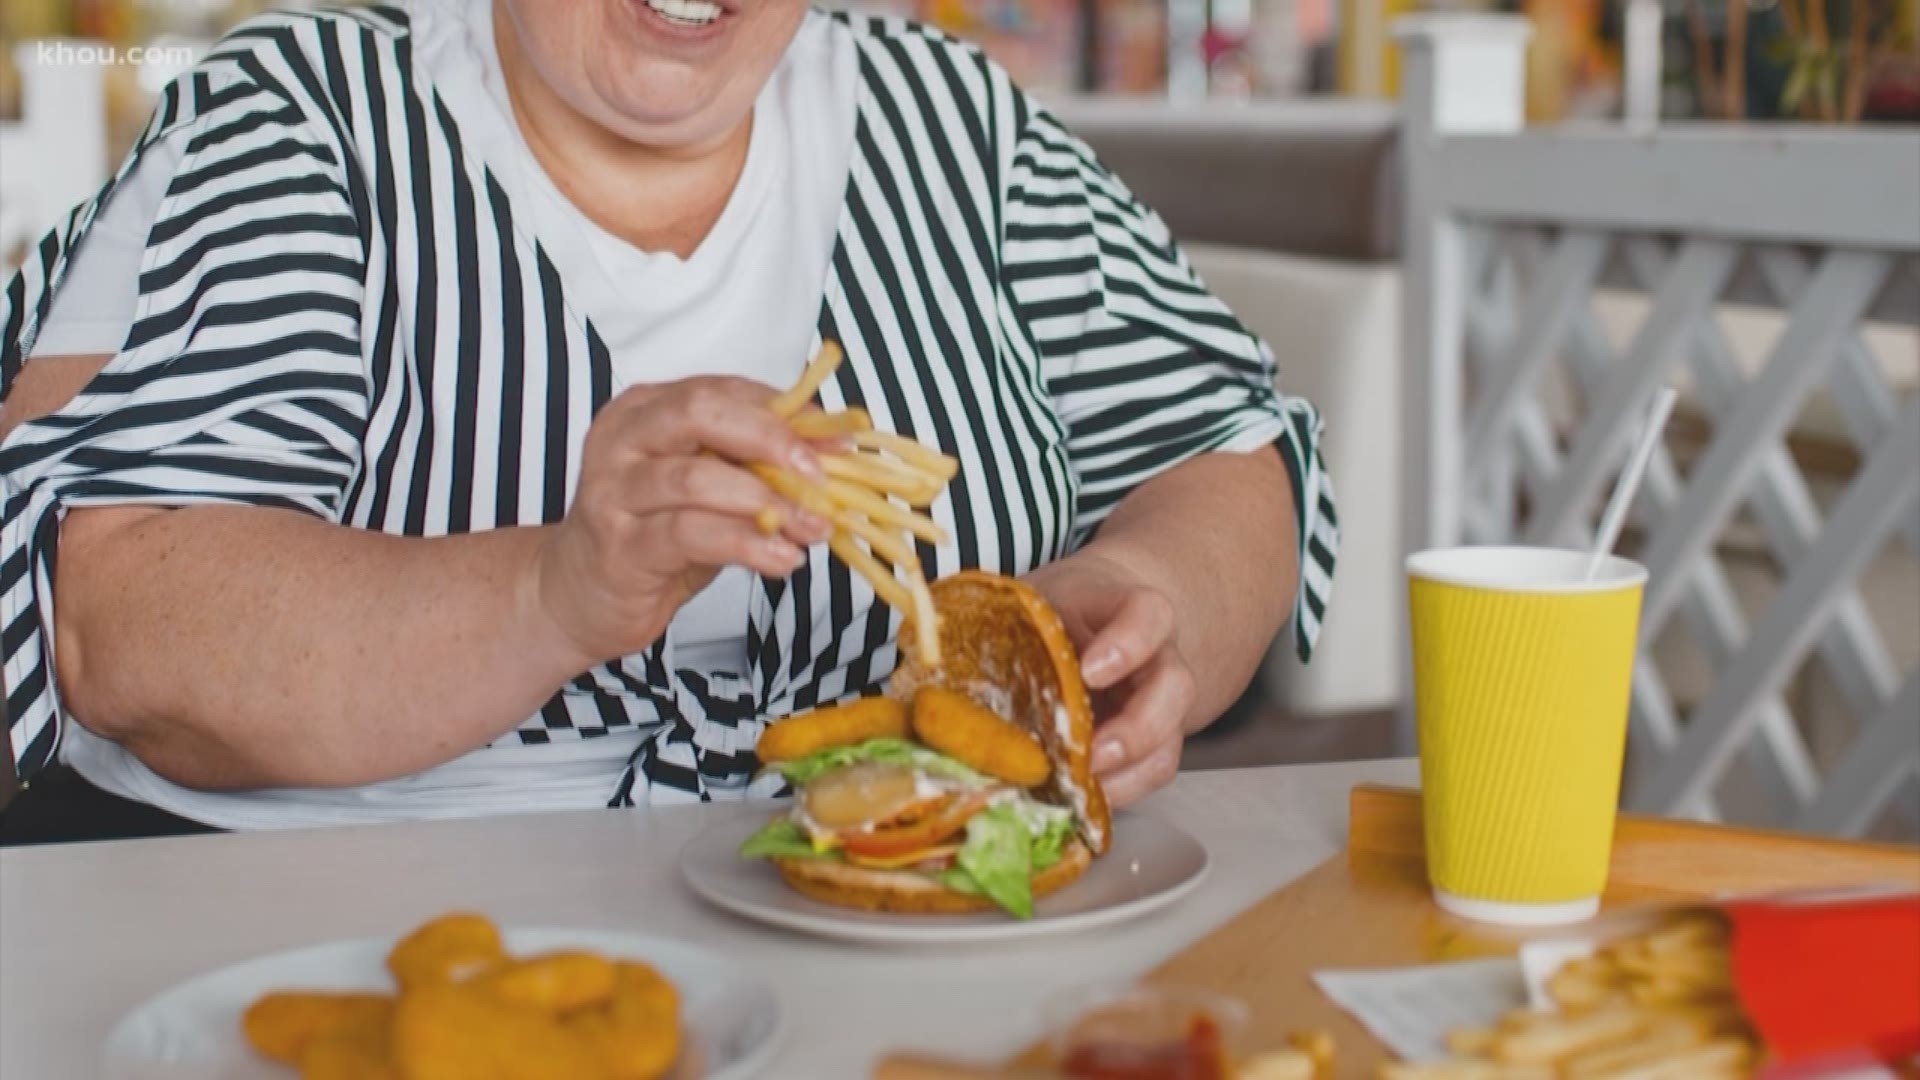 As many of you resolve to lose weight this New Year, we break down the facts about obesity in America.